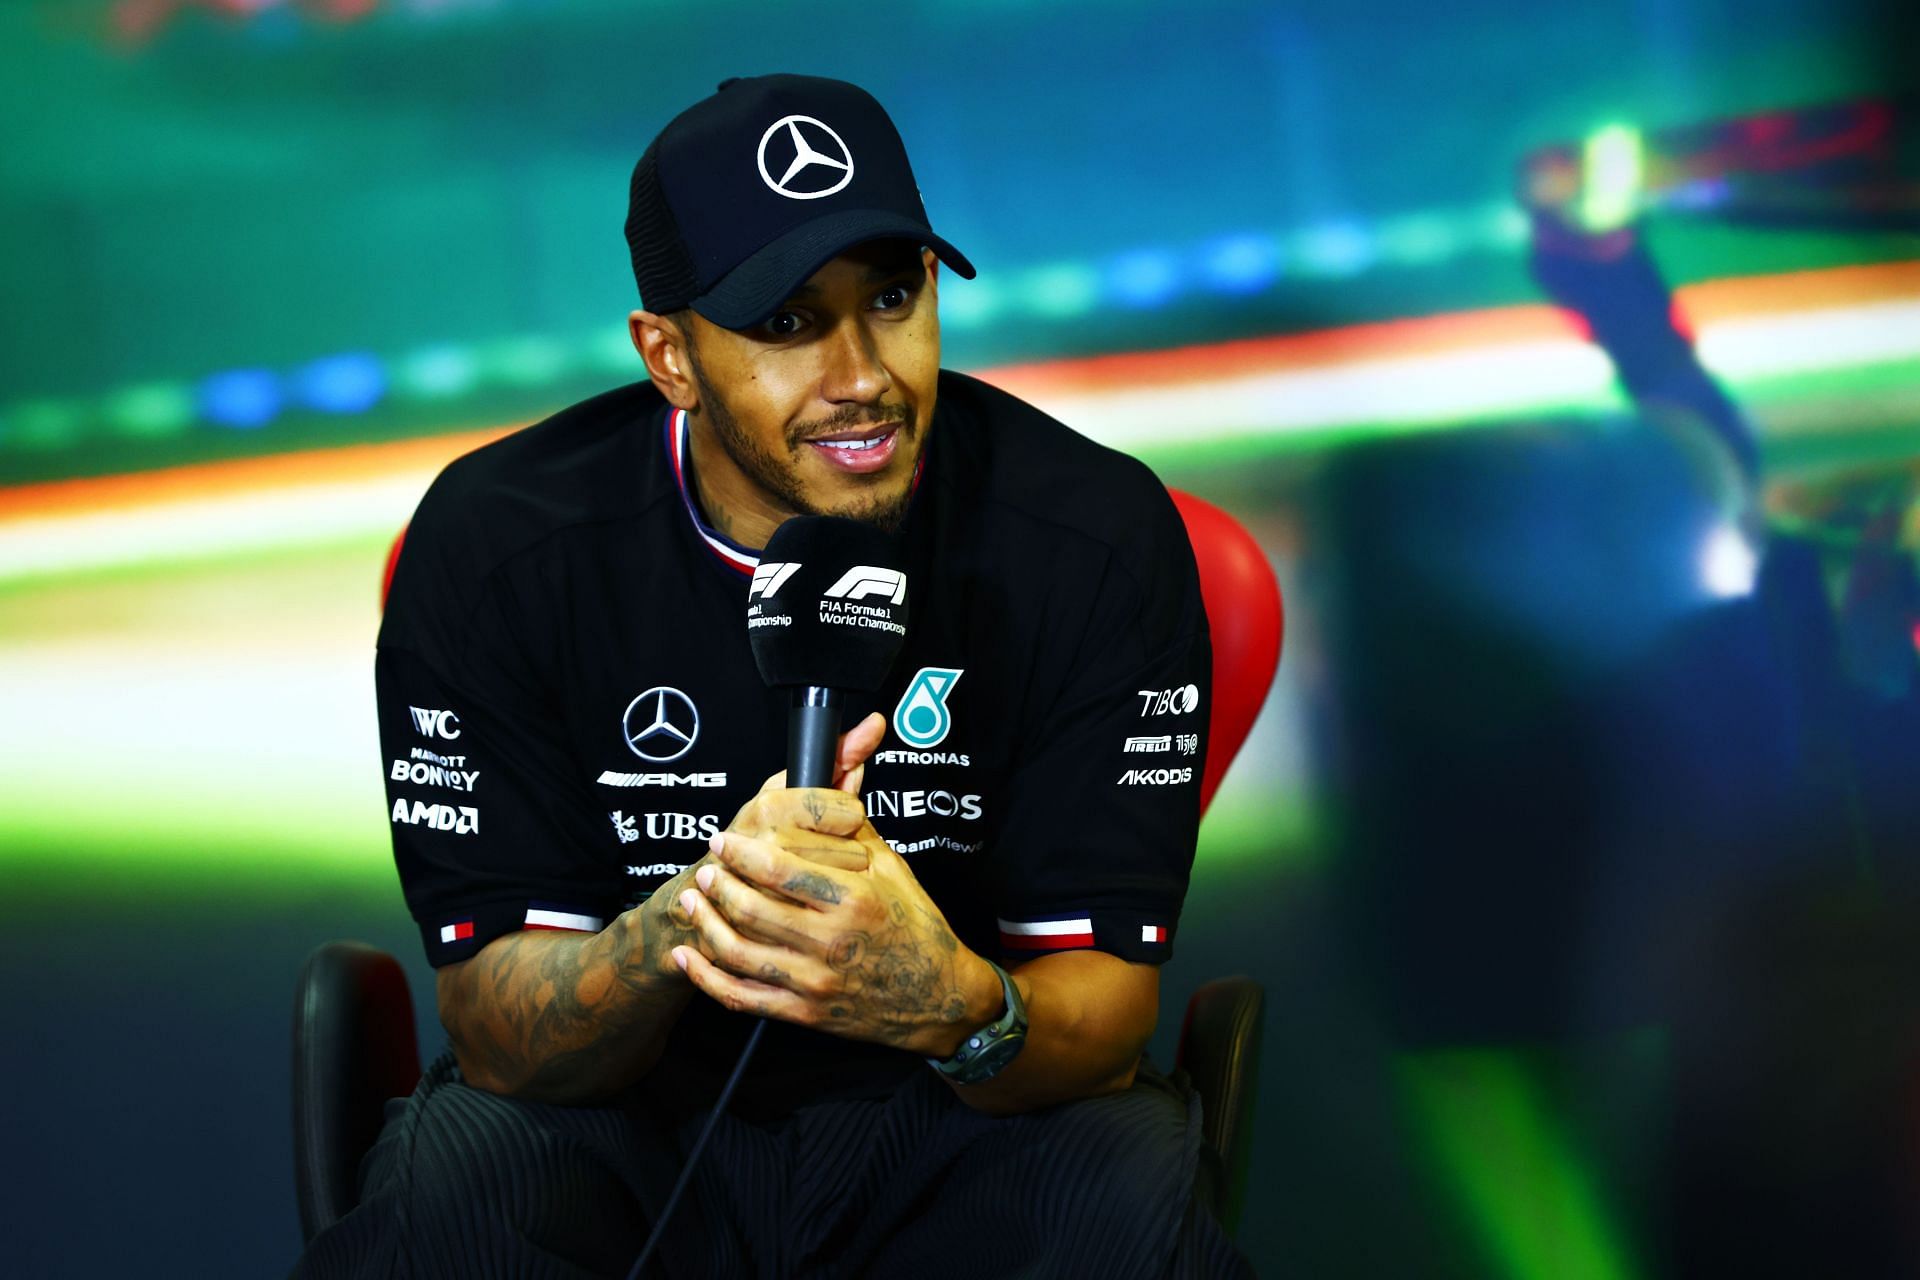 Lewis Hamilton reflected on the FIA-jewelry saga in a recent interview